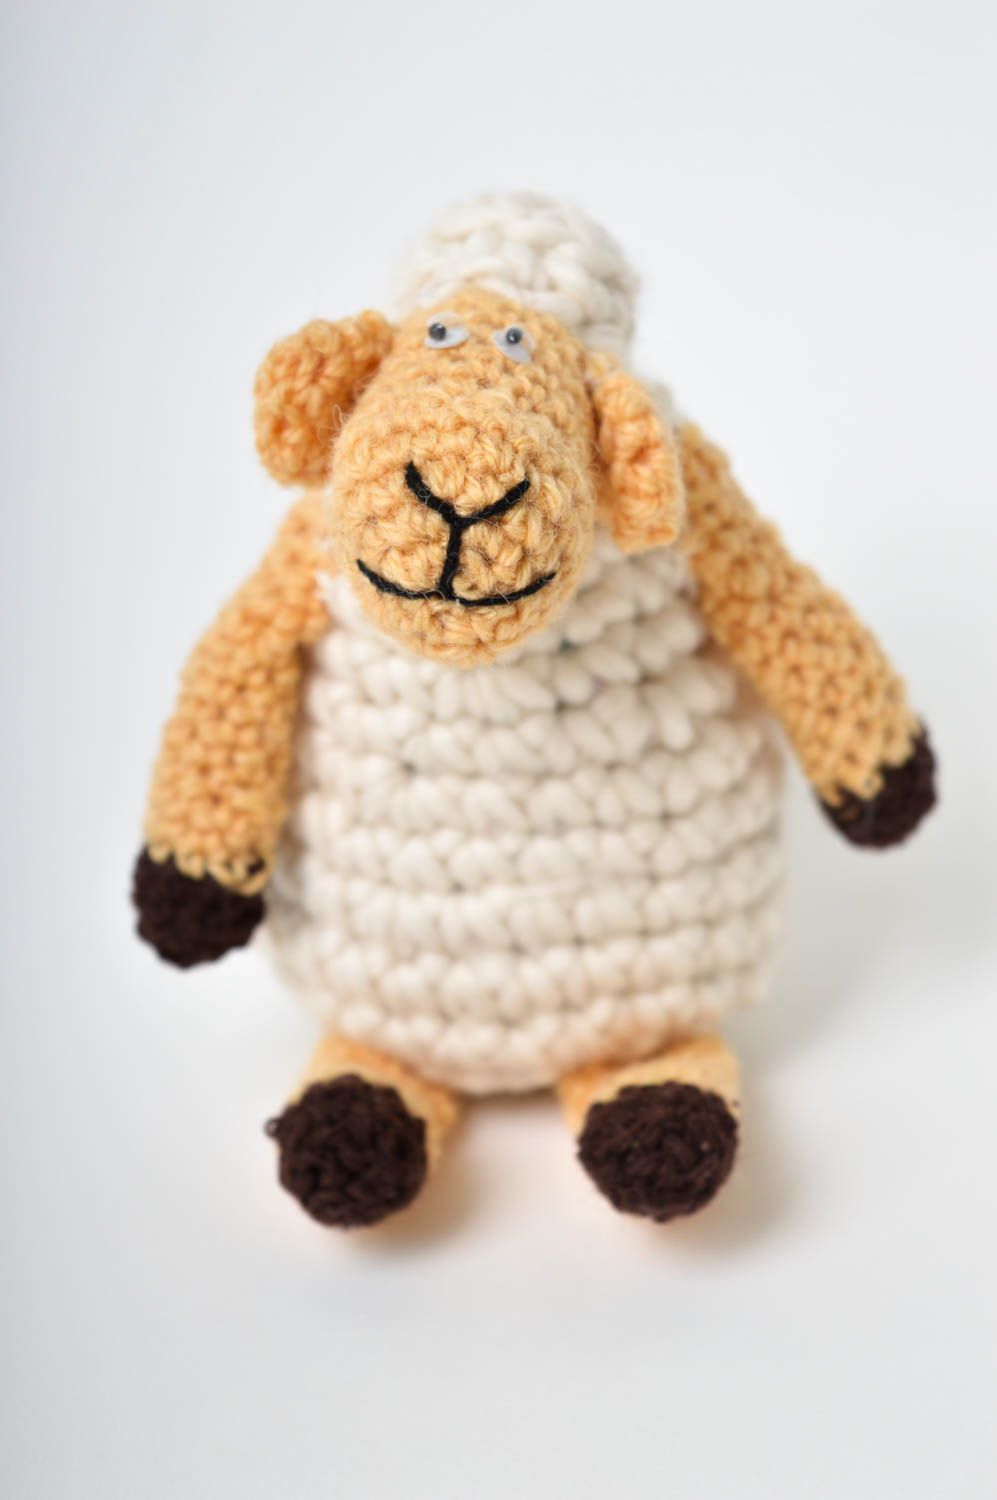 Crocheted handmade stuffed toy for children soft toy for babies interior decor photo 2